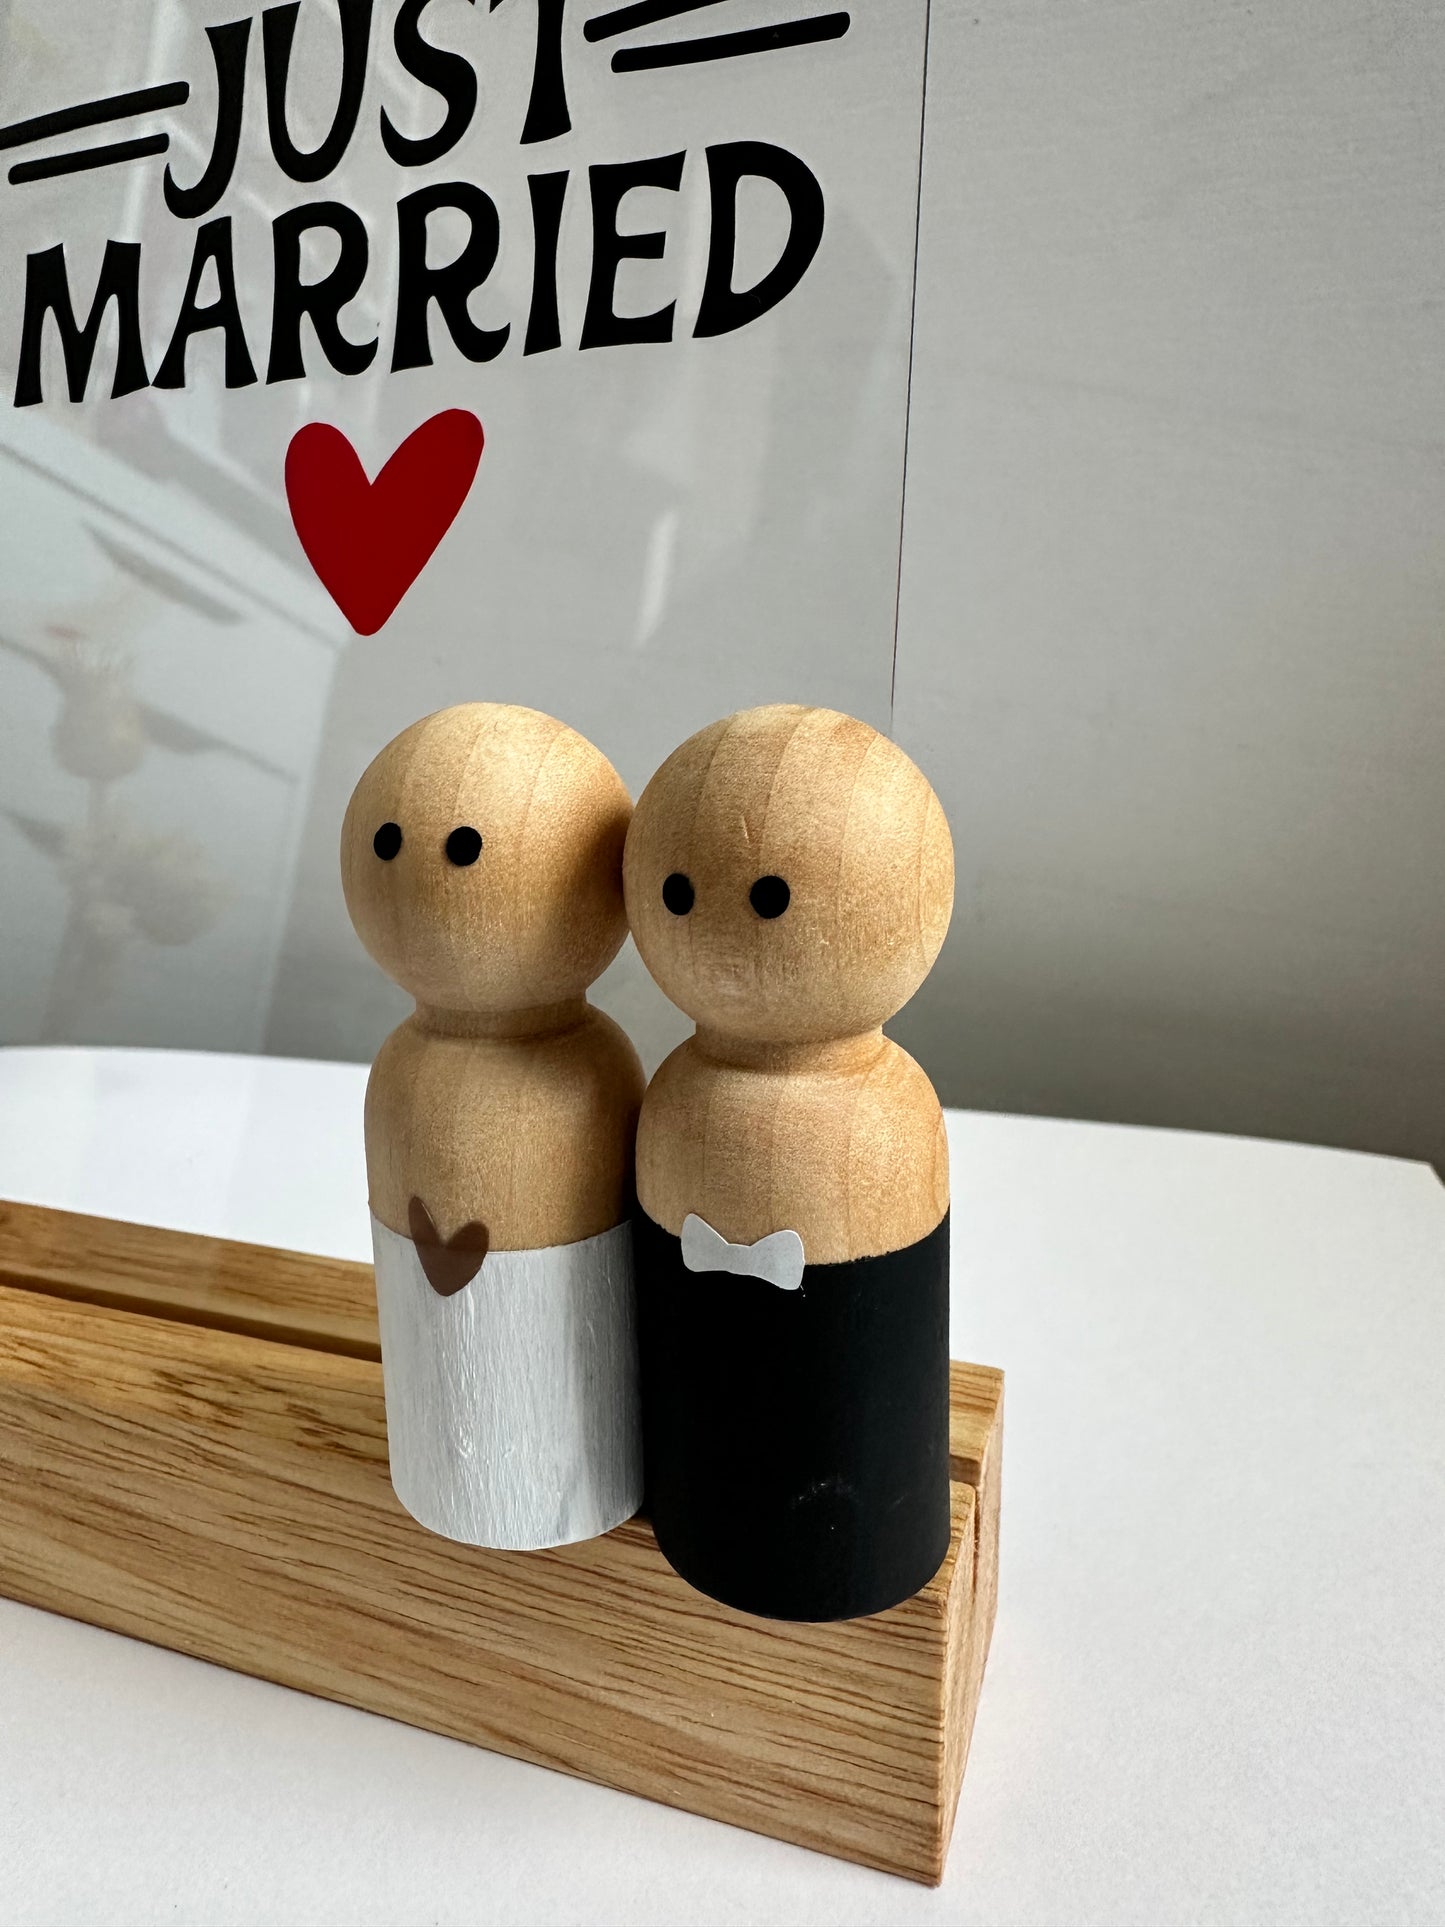 Just Married Wood Plaque